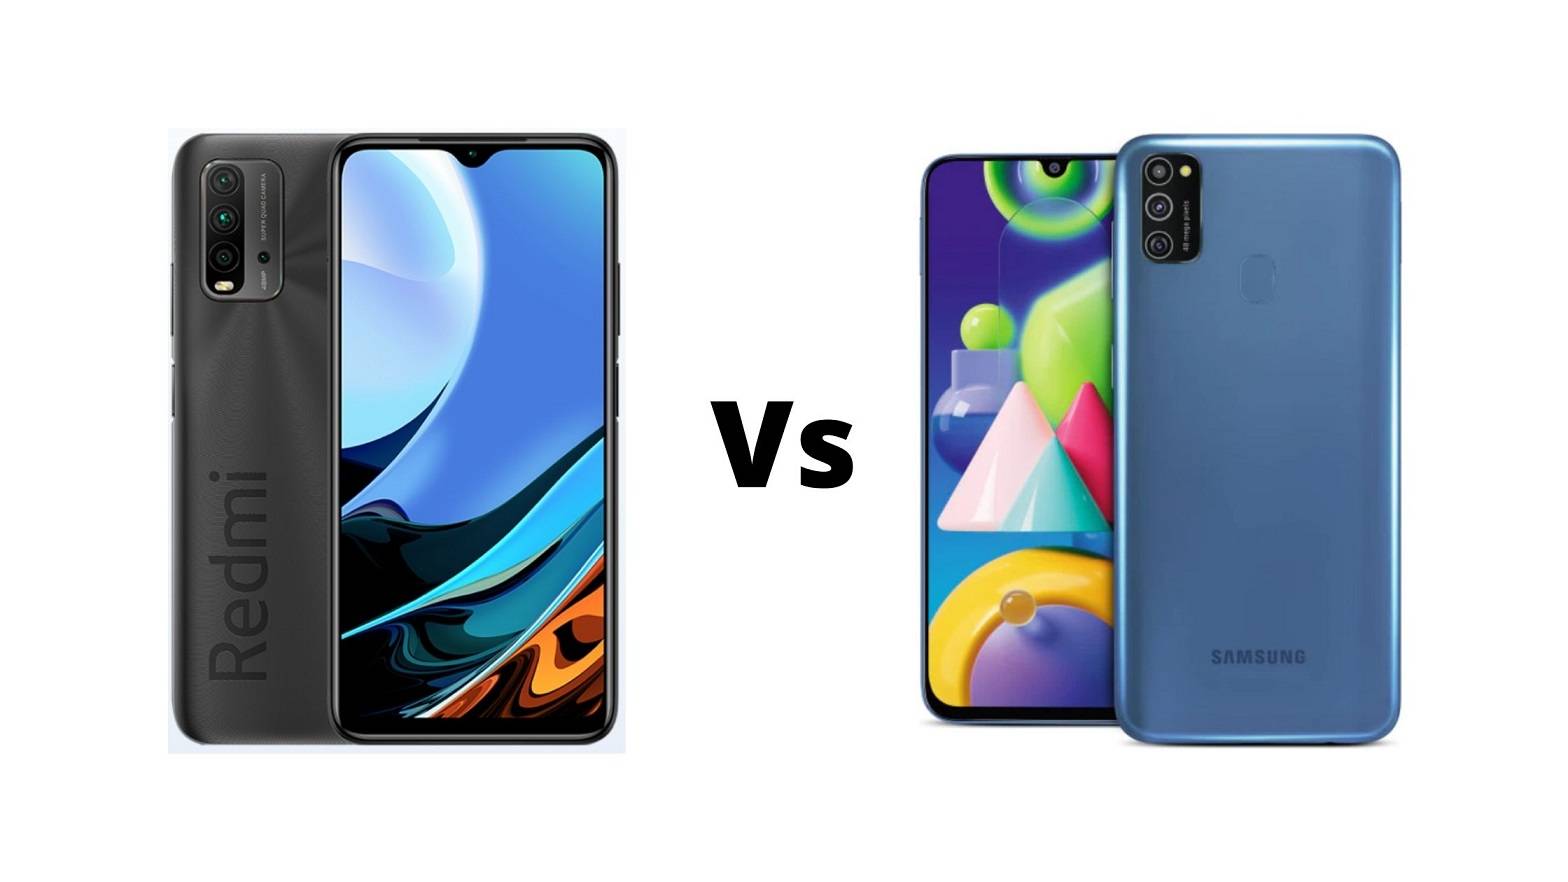 Redmi 9 Power Vs Galaxy M21 Which one should you buy